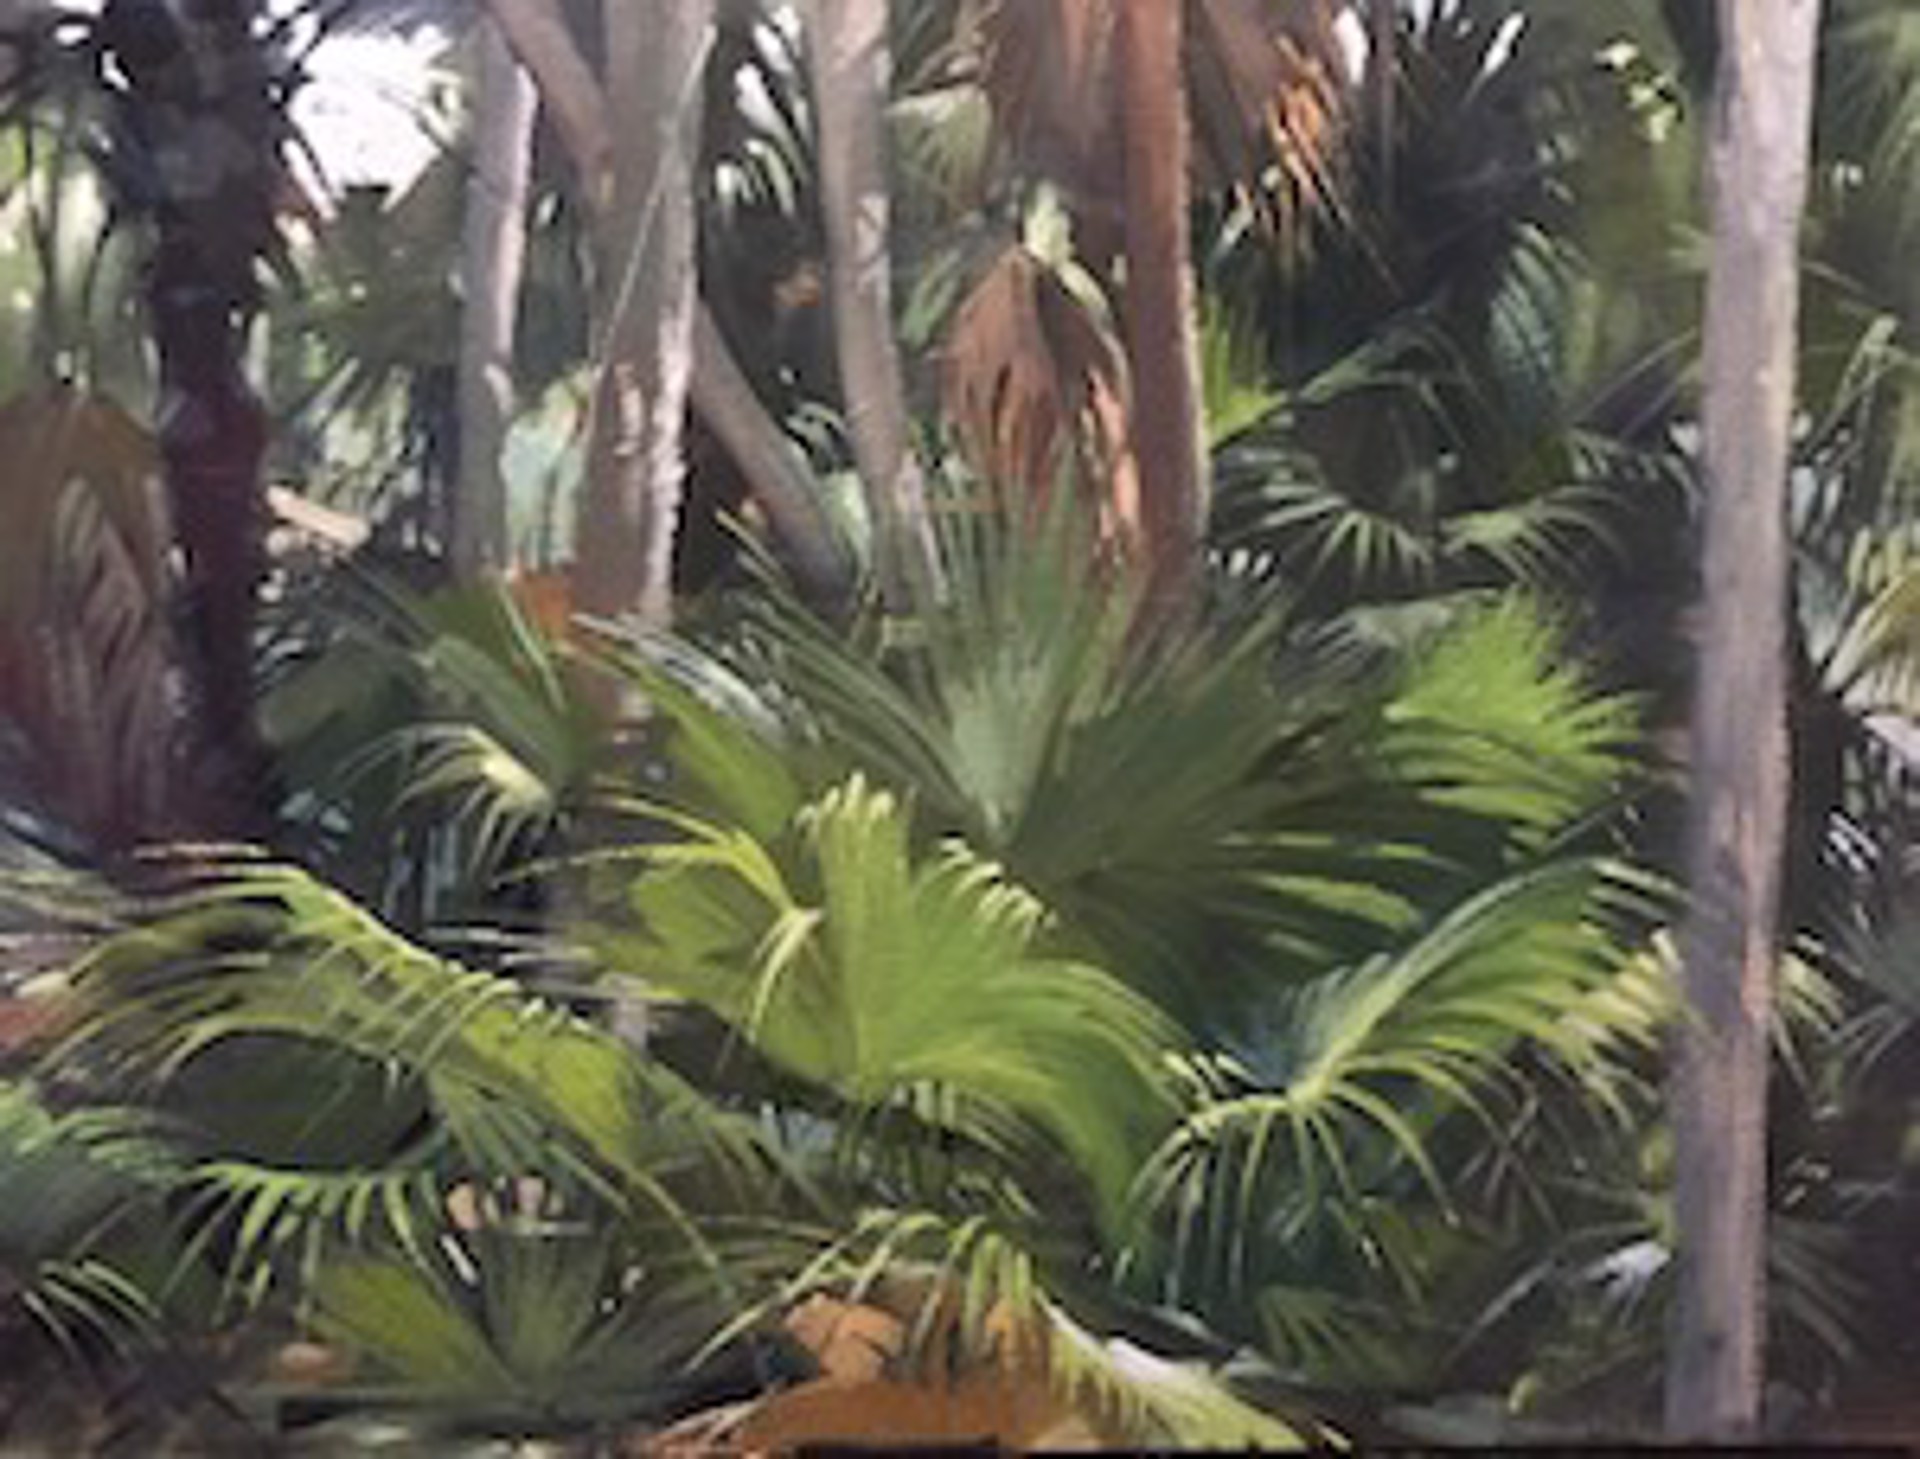 Palms in Motion by Morgan Samuel Price